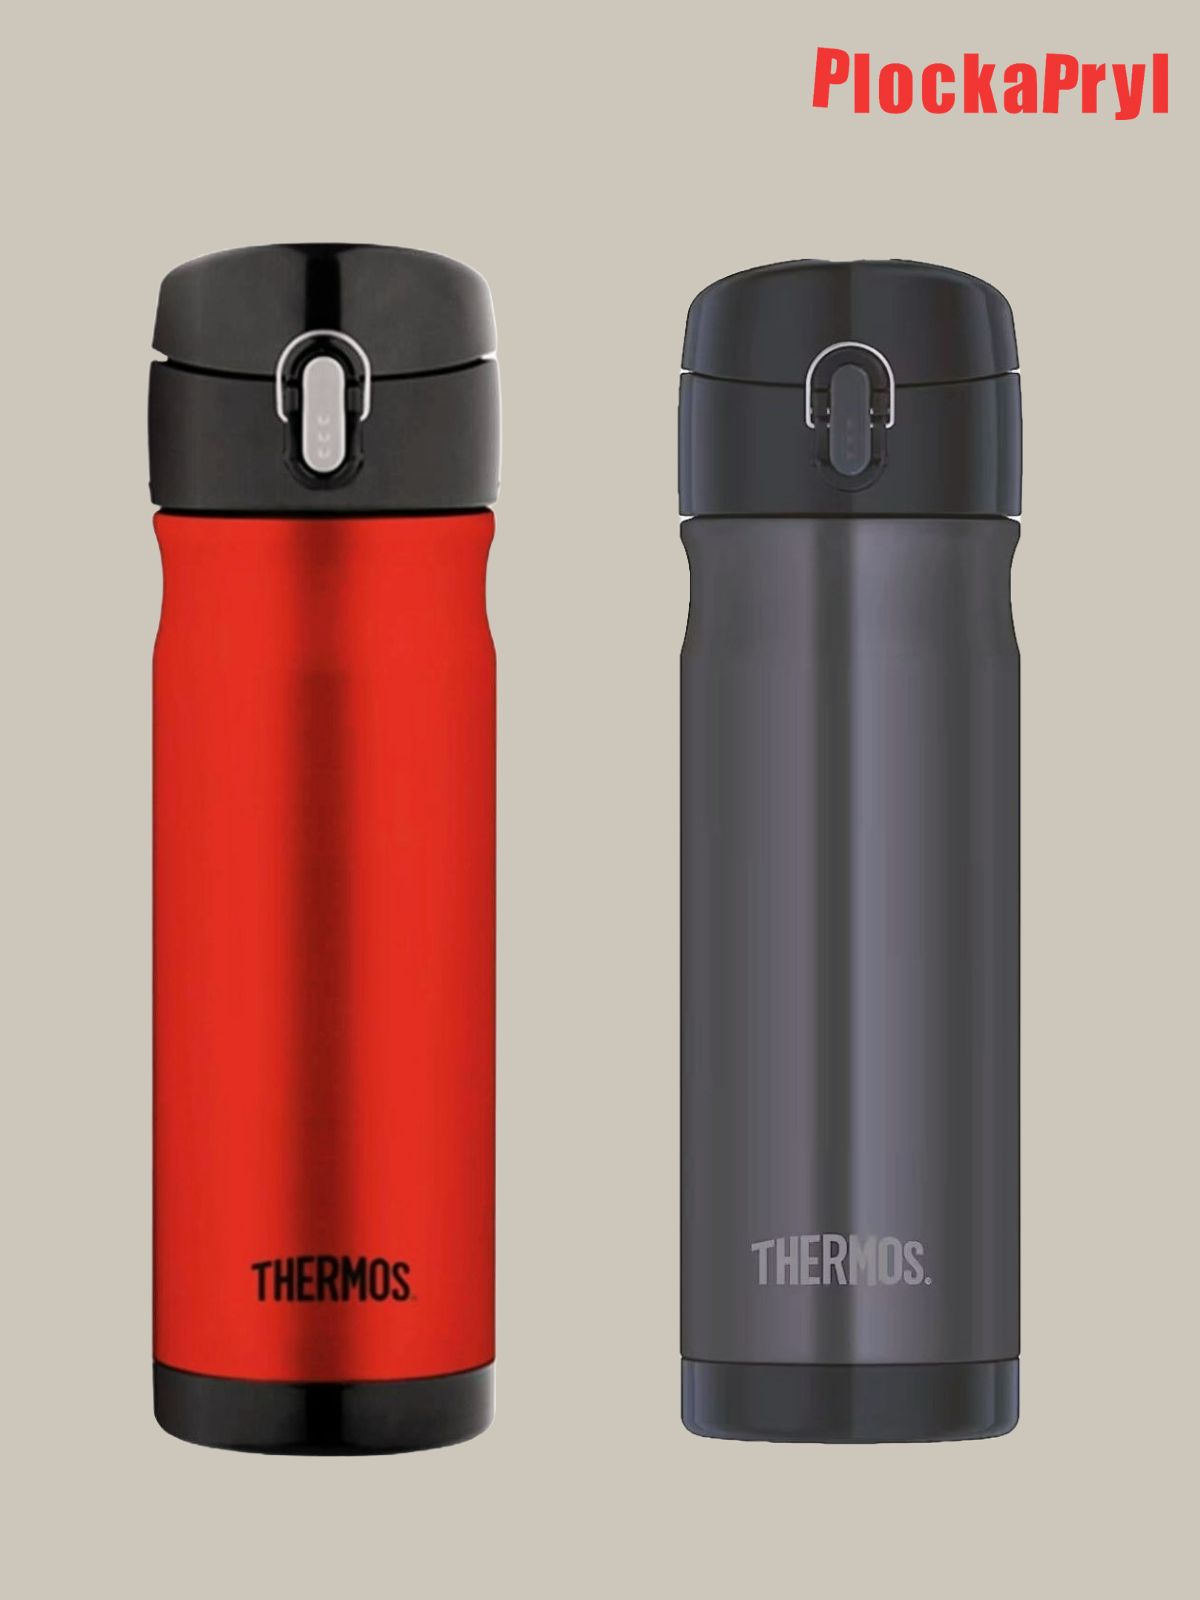 Thermos Mobile Pro, muggtermos 0.5L